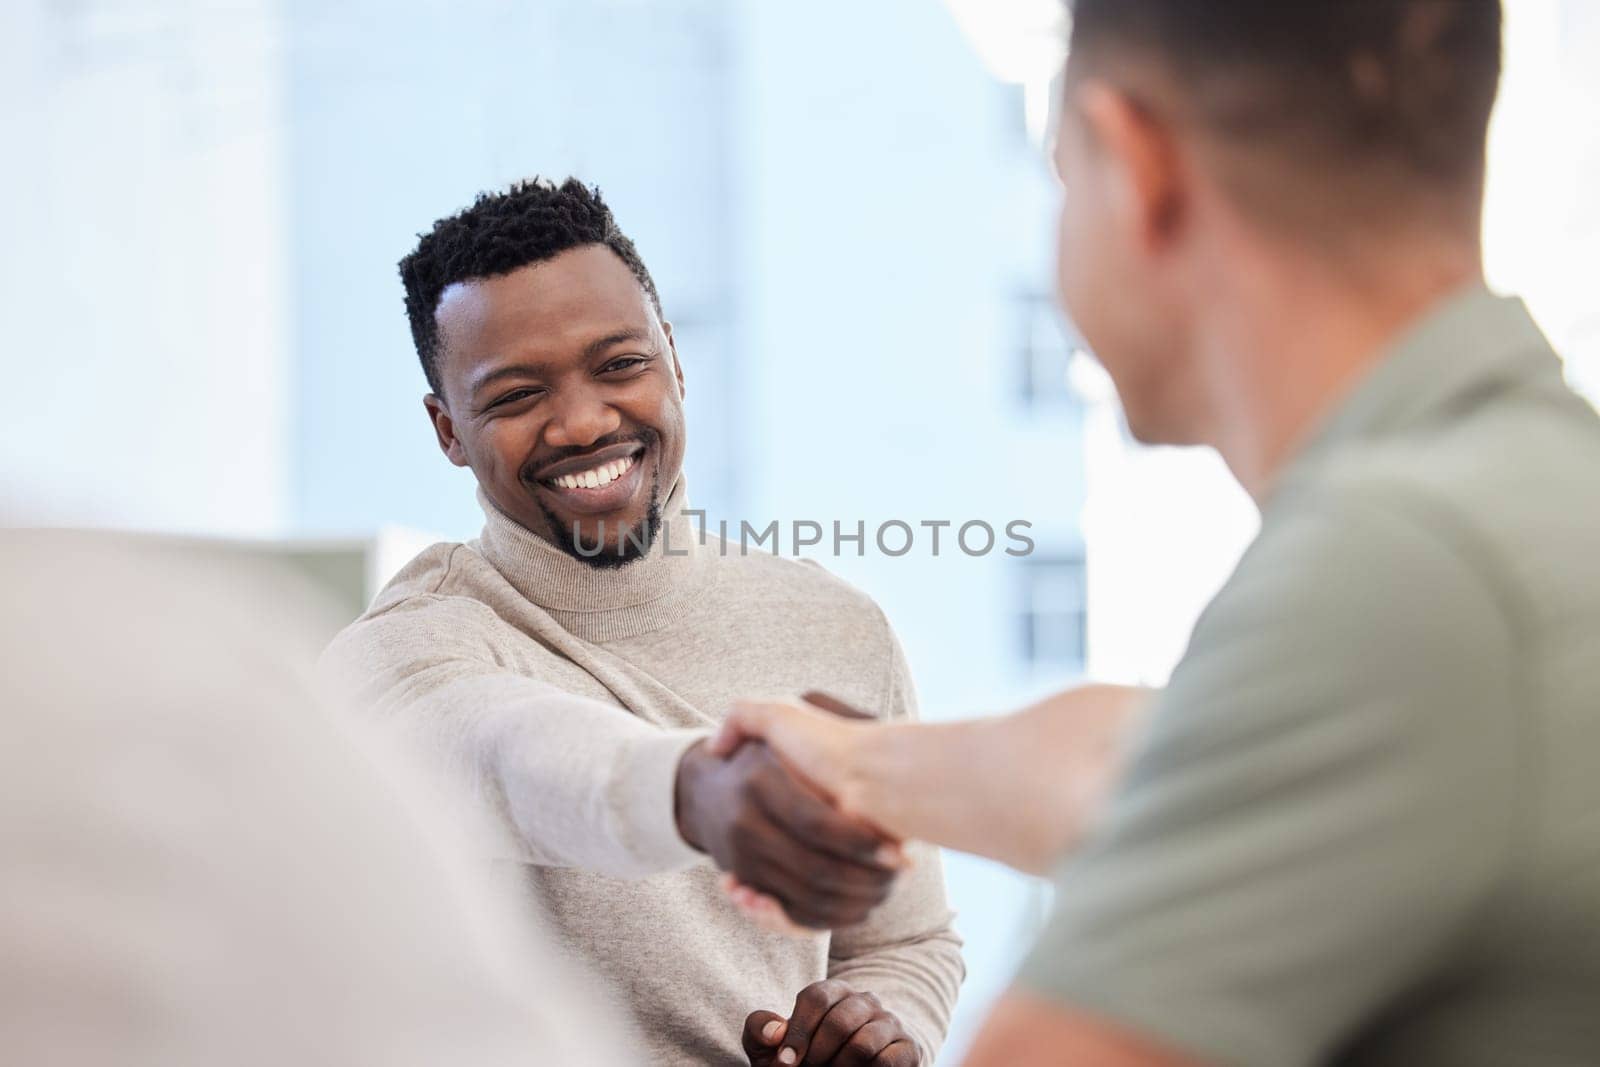 Men, handshake and partnership, success in interview with onboarding, promotion and working together. Collaboration, professional team and business people shaking hands in office, hiring and welcome.